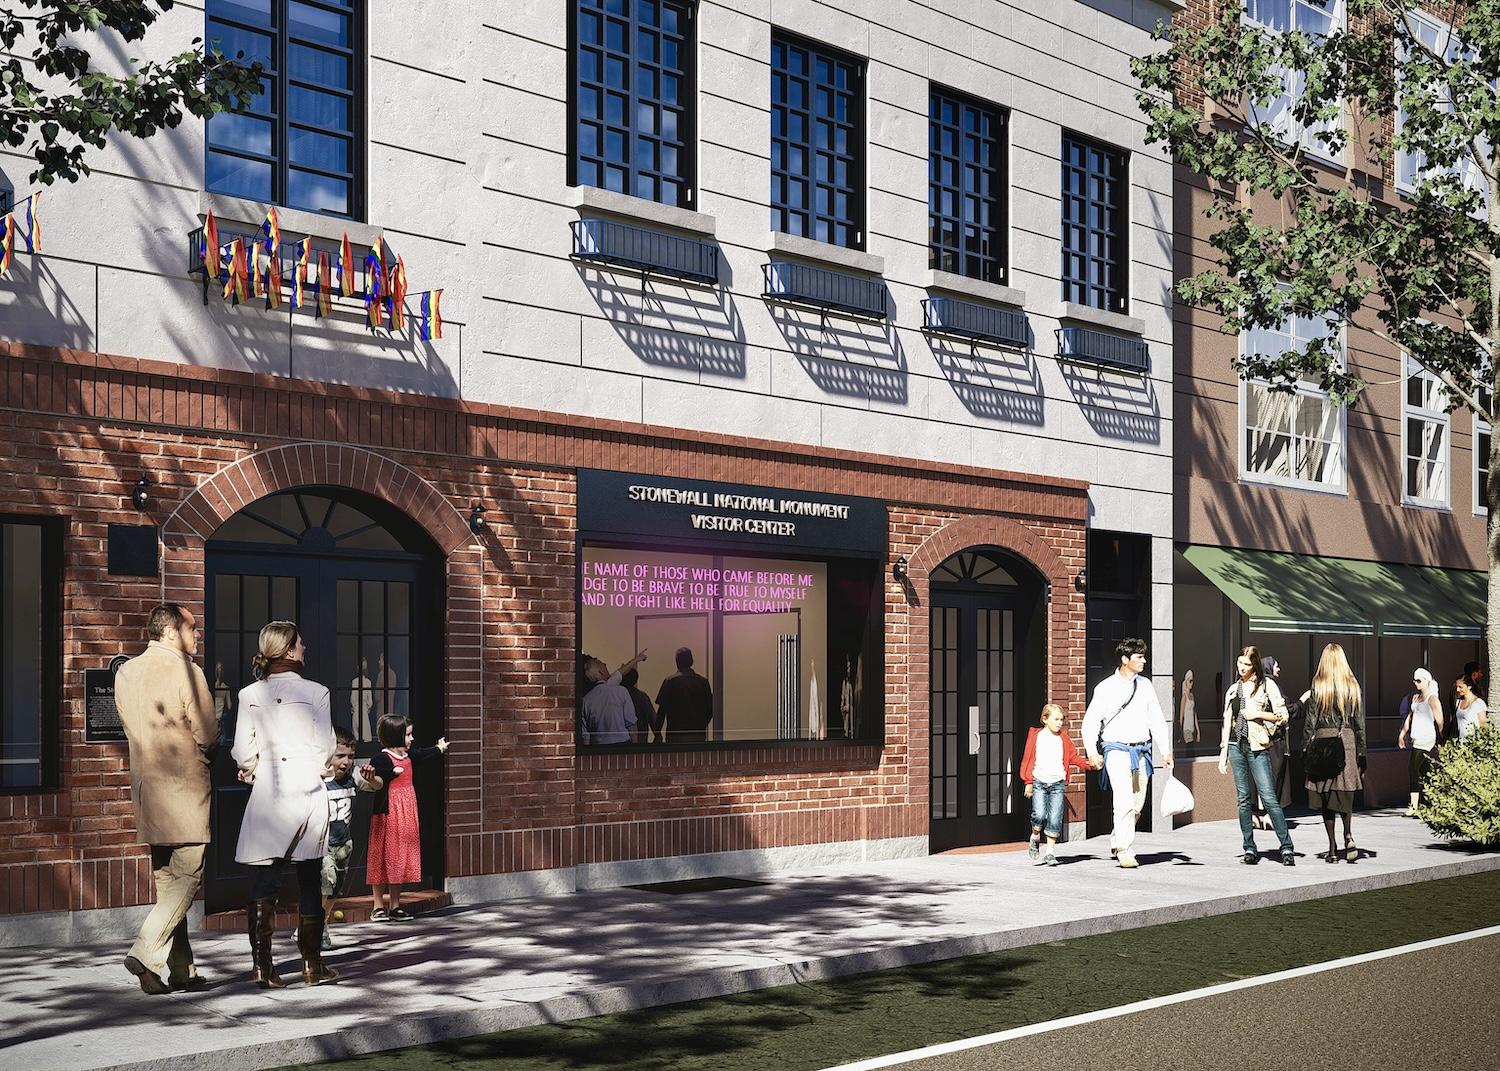 A rendering of what the exterior of the Stonewall National Monument Visitor Center is going to look like.